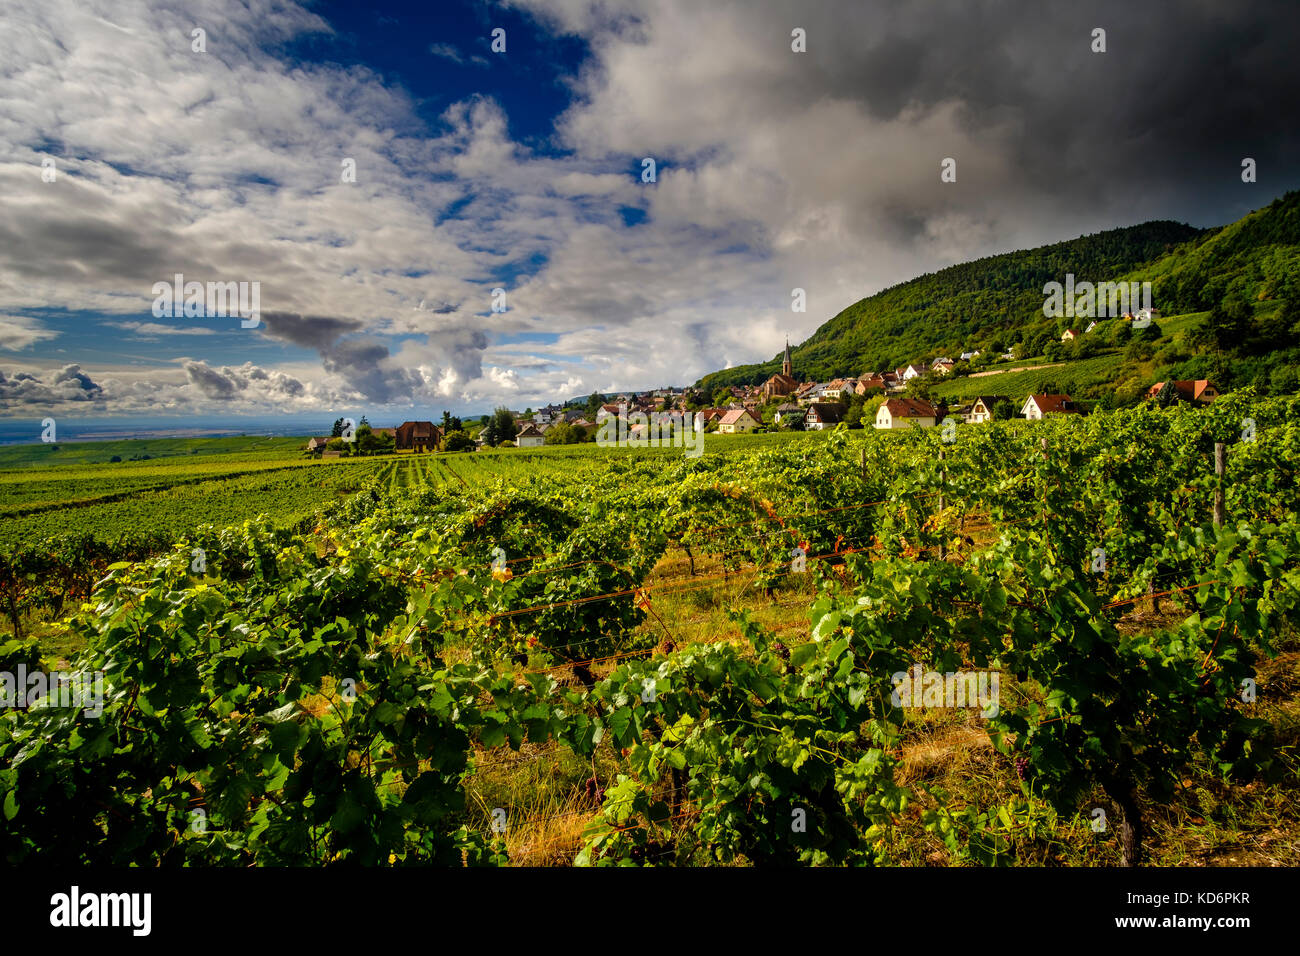 Vineyards are surrounding the village Häusern, Husseren-les-Châteaux, located at the foot of Alsace hills Stock Photo